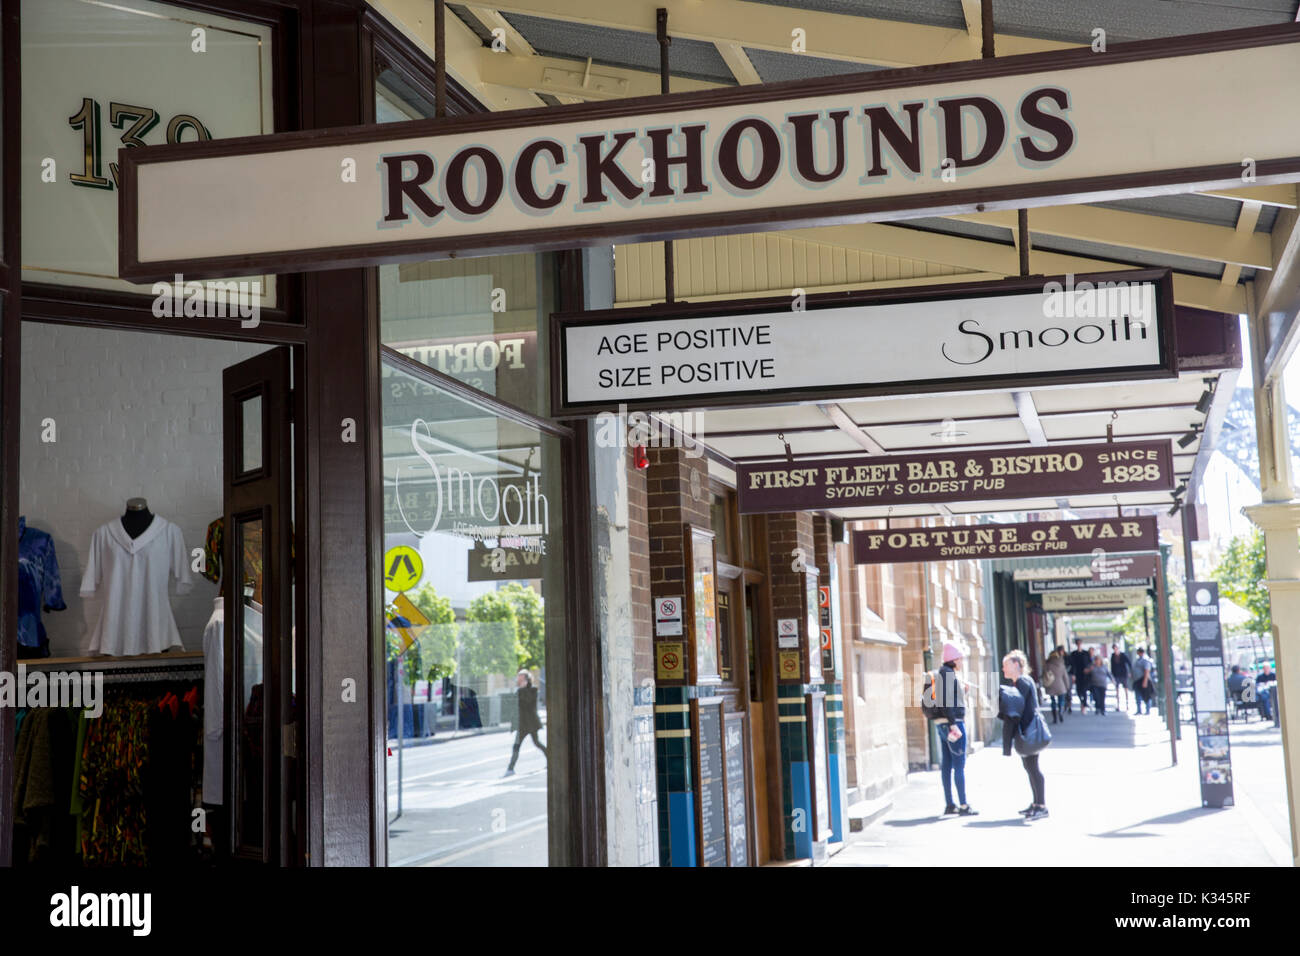 Shops in The Rocks Sydney including opal store Rockhounds and Fortune of War oldest pub,Sydney,Australia Stock Photo